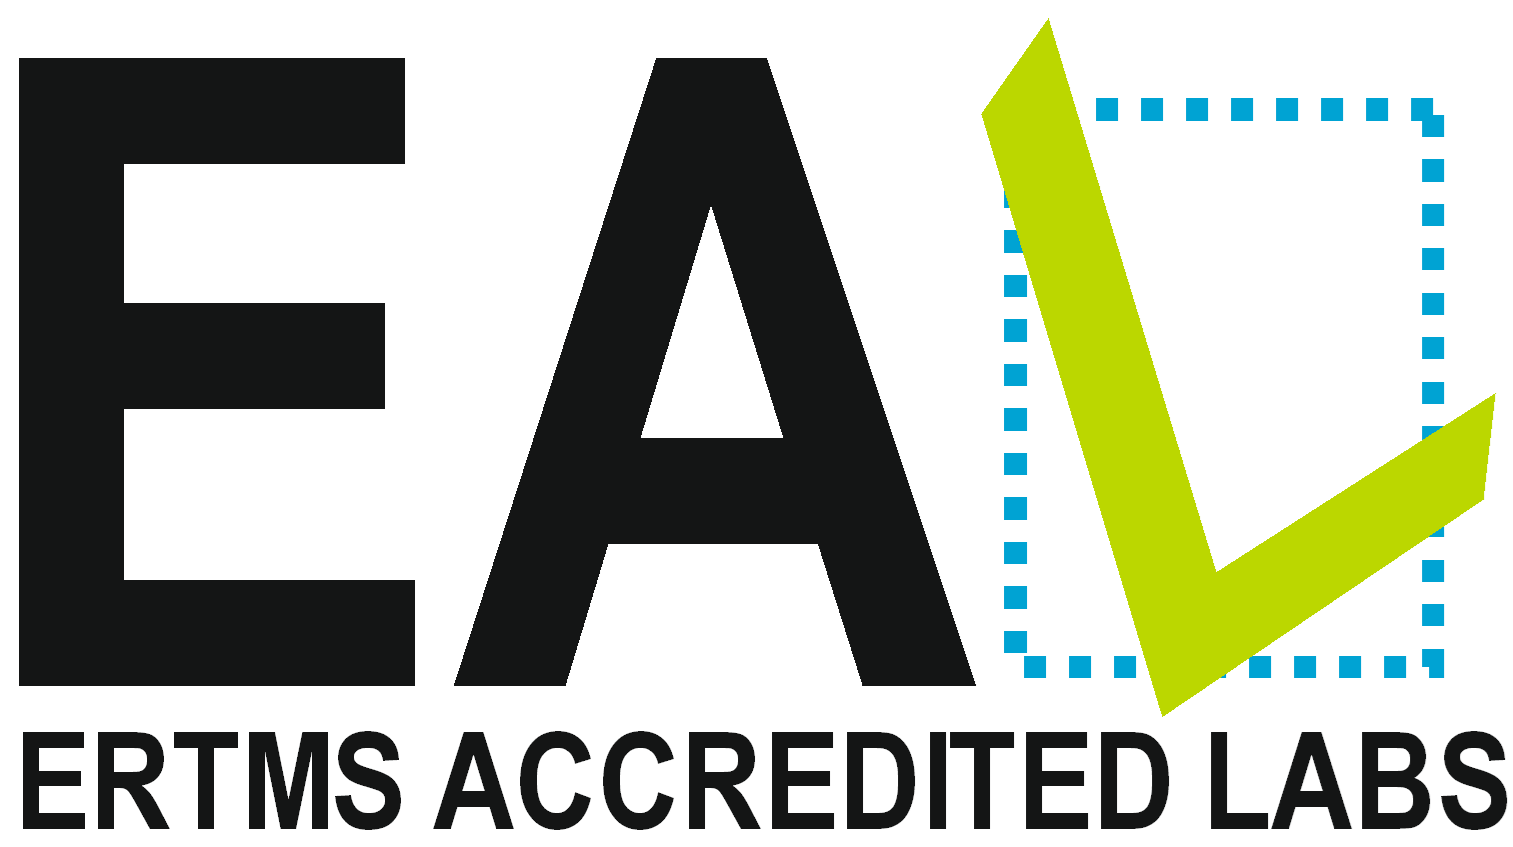 EAL, ERTMS Accredited Labs